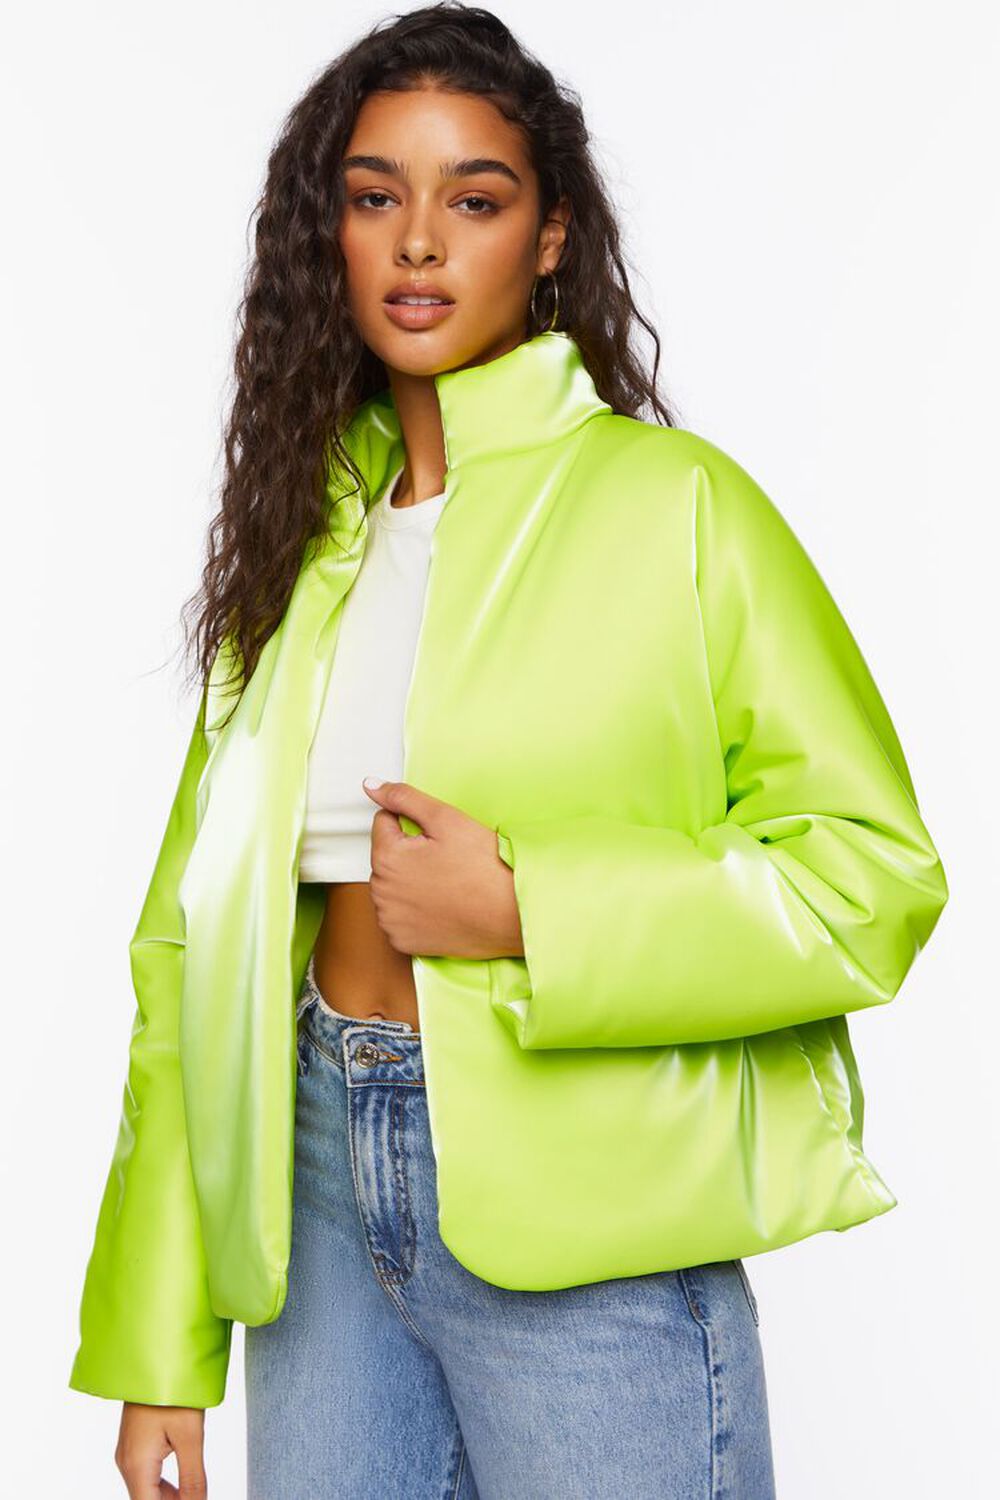 LIME Open-Front Puffer Jacket, image 1